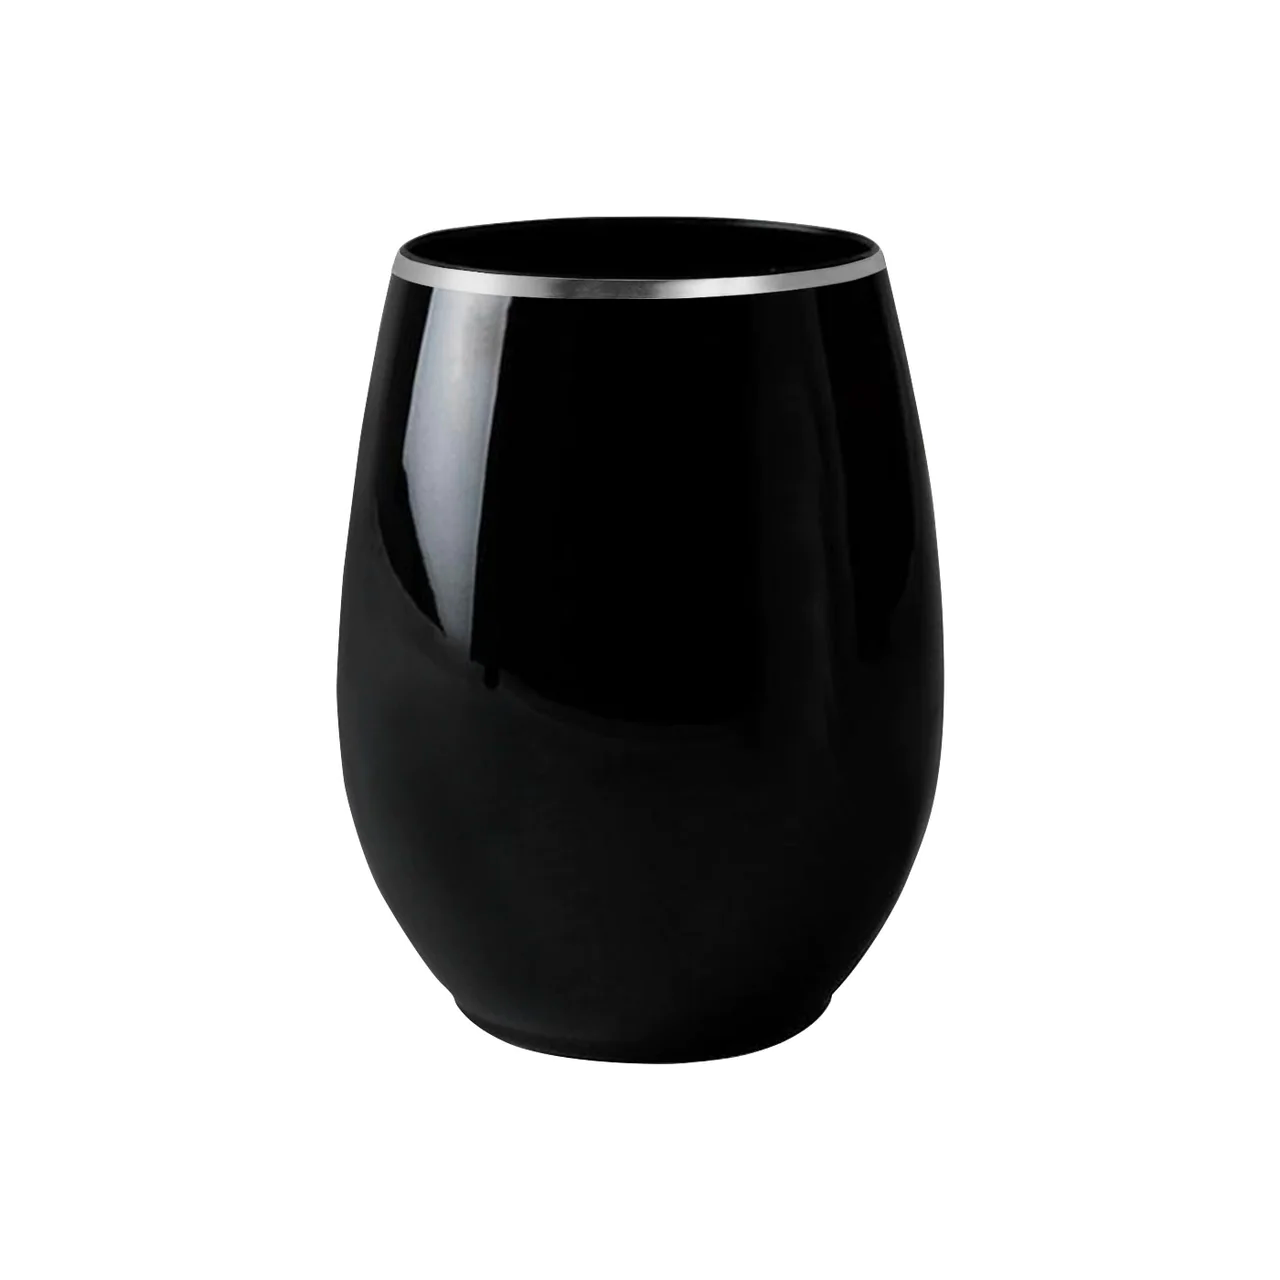 12 oz. Elegant Stemless Plastic Wine Glasses - Black with Silver Rim (16 Count) - Set With Style